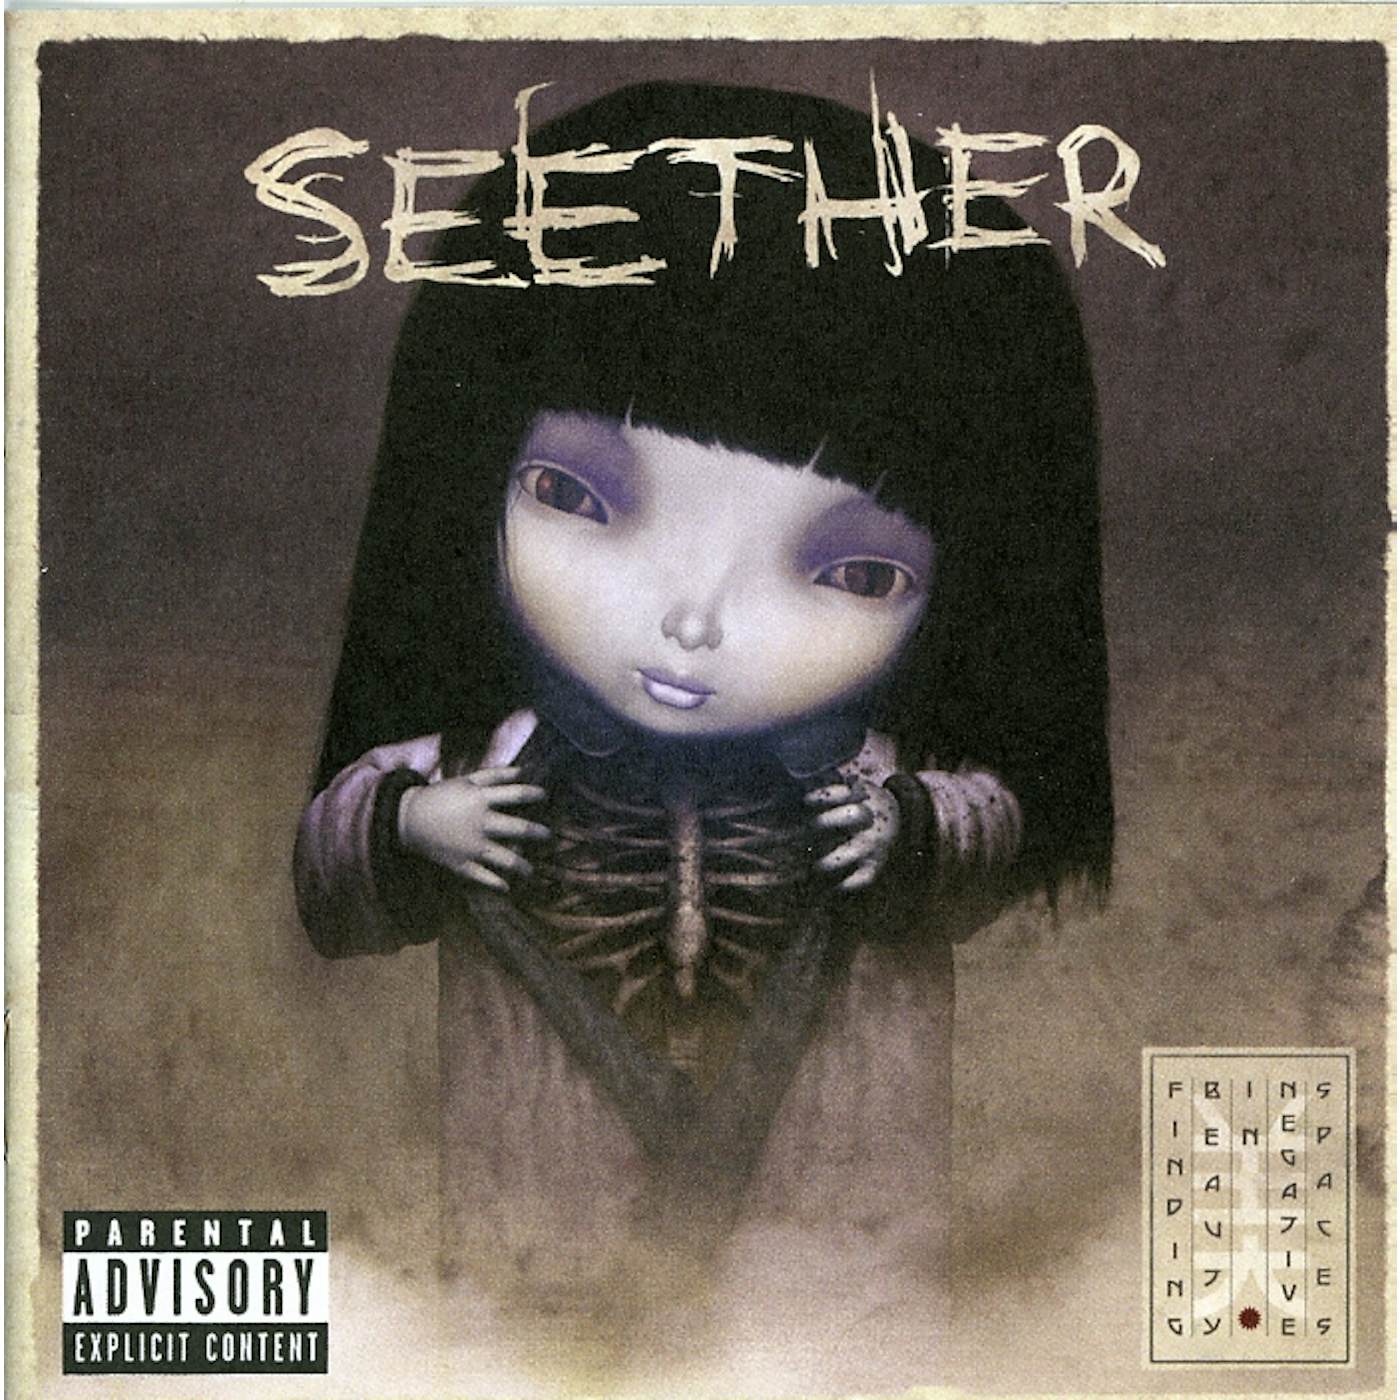 Seether FINDING BEAUTY IN NEGATIVE SPACES CD